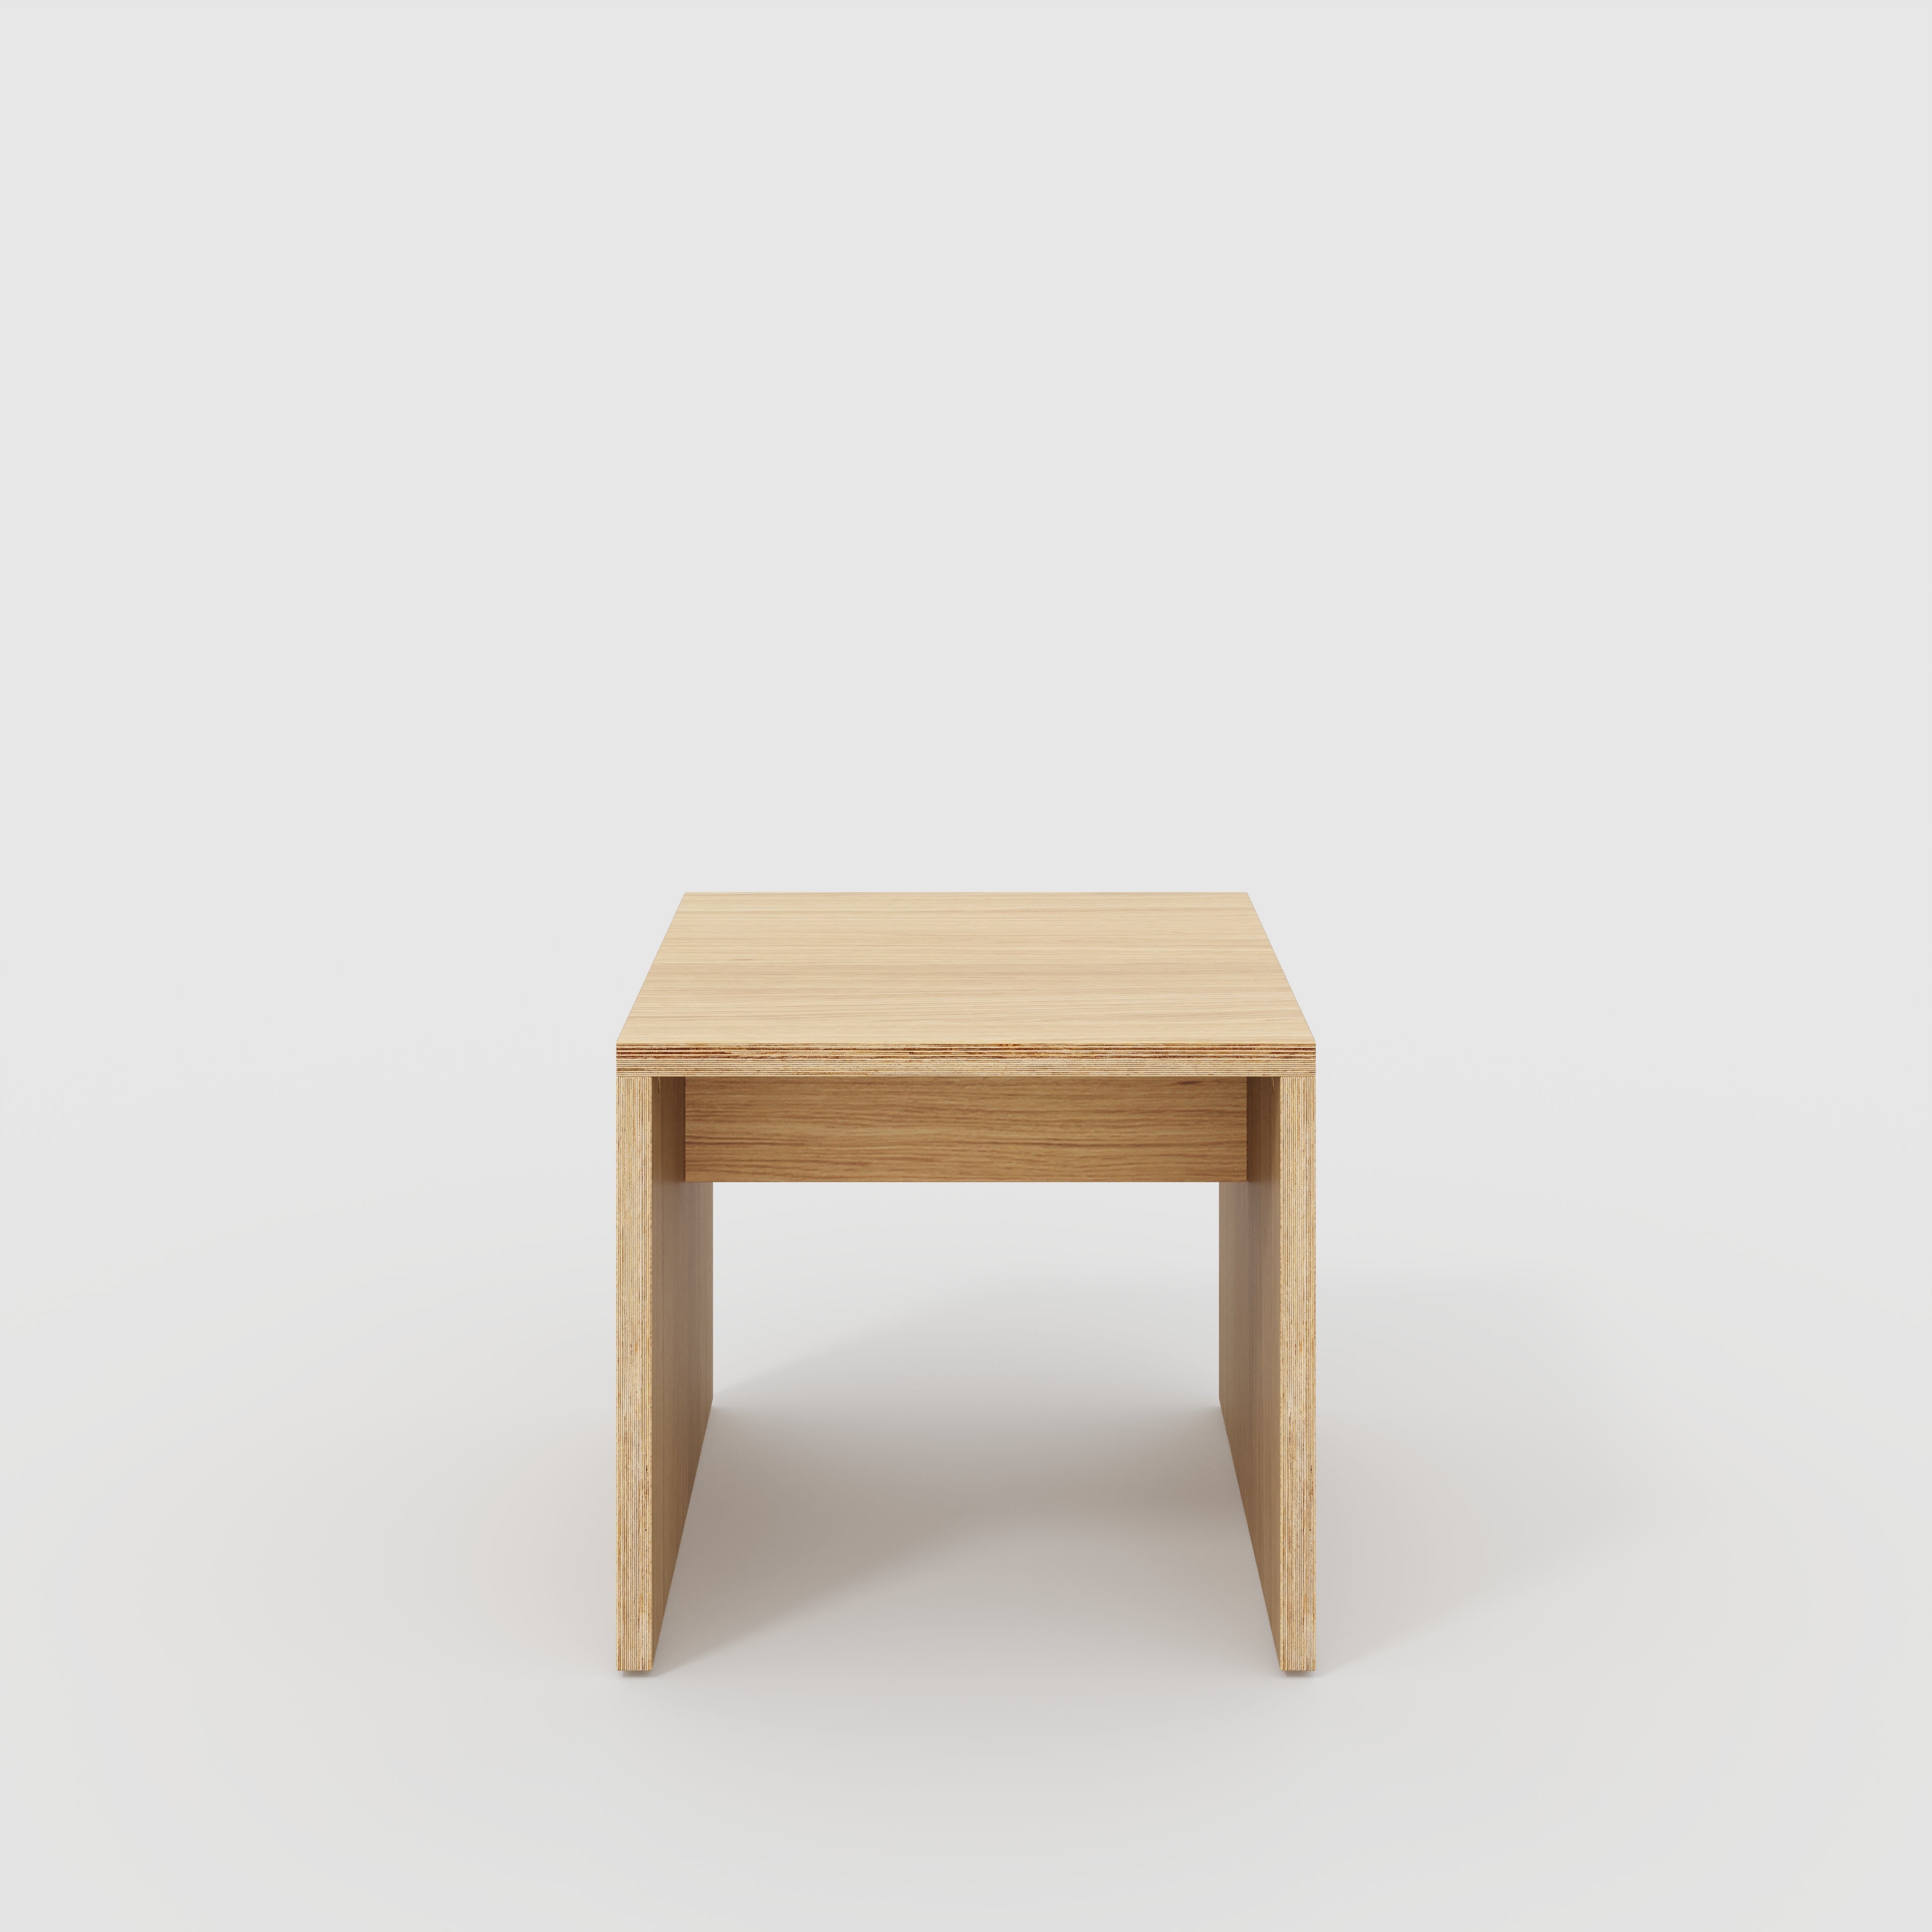 Side Table with Solid Sides - Plywood Oak - 500(w) x 500(d) x 450(h)